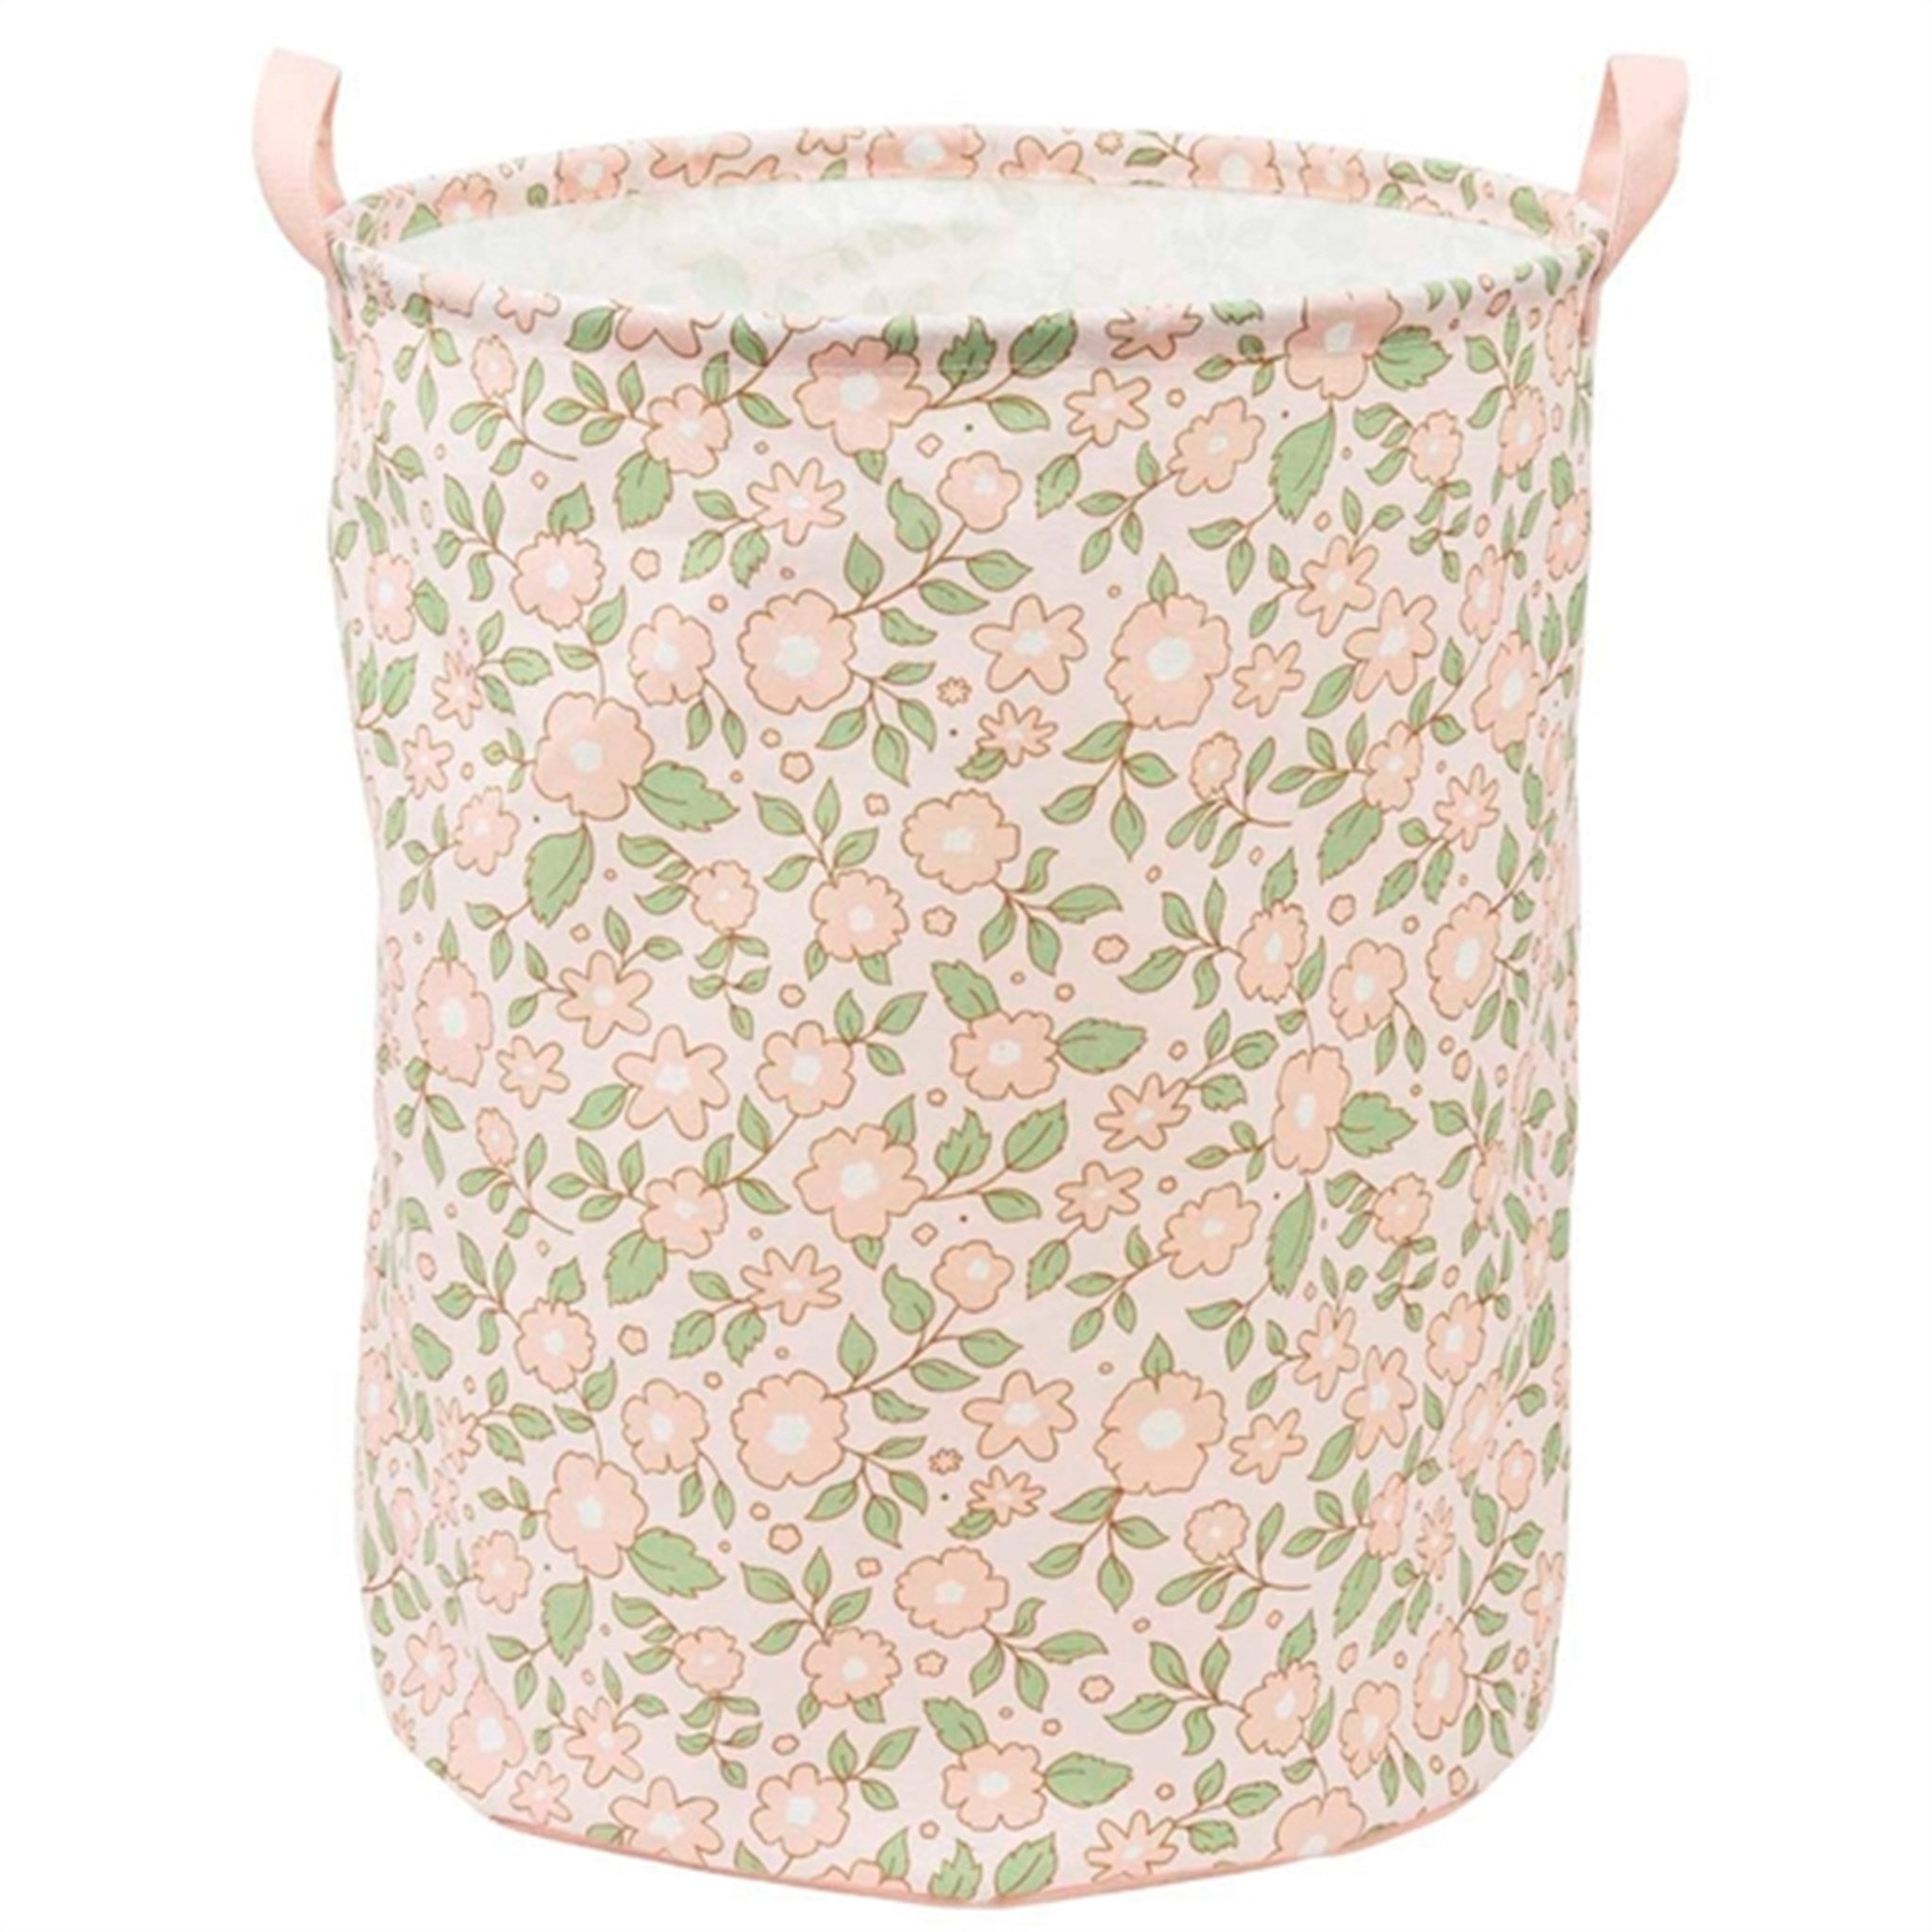 A Little Lovely Company Storage Basket Blossoms Pink